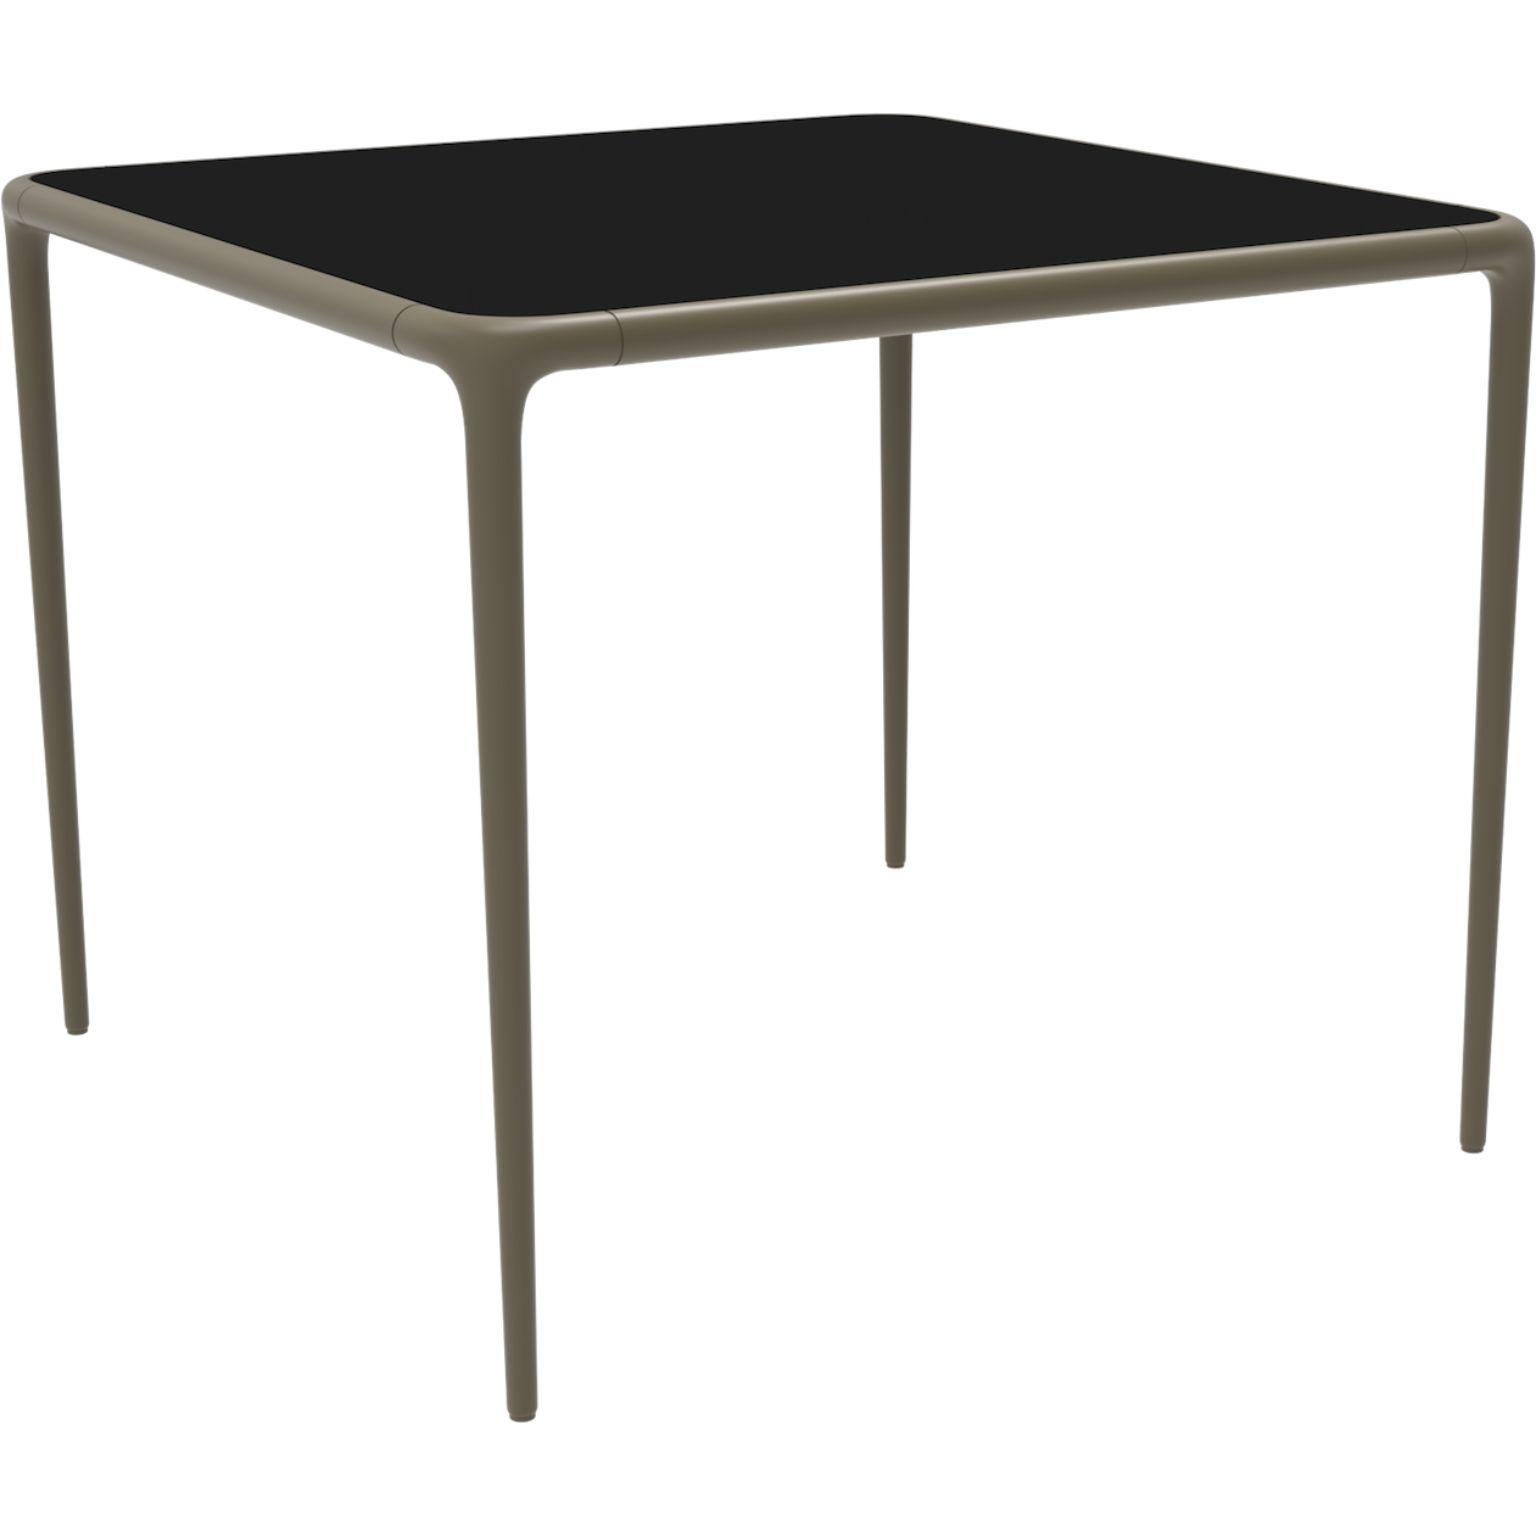 Xaloc bronze glass top table 90 by Mowee.
Dimensions: D90 x W90 x H74 cm.
Material: Aluminum, tinted tempered glass top.
Also available in different aluminum colors and finishes (HPL Black Edge or Neolith). 

Xaloc synthesizes the lines of